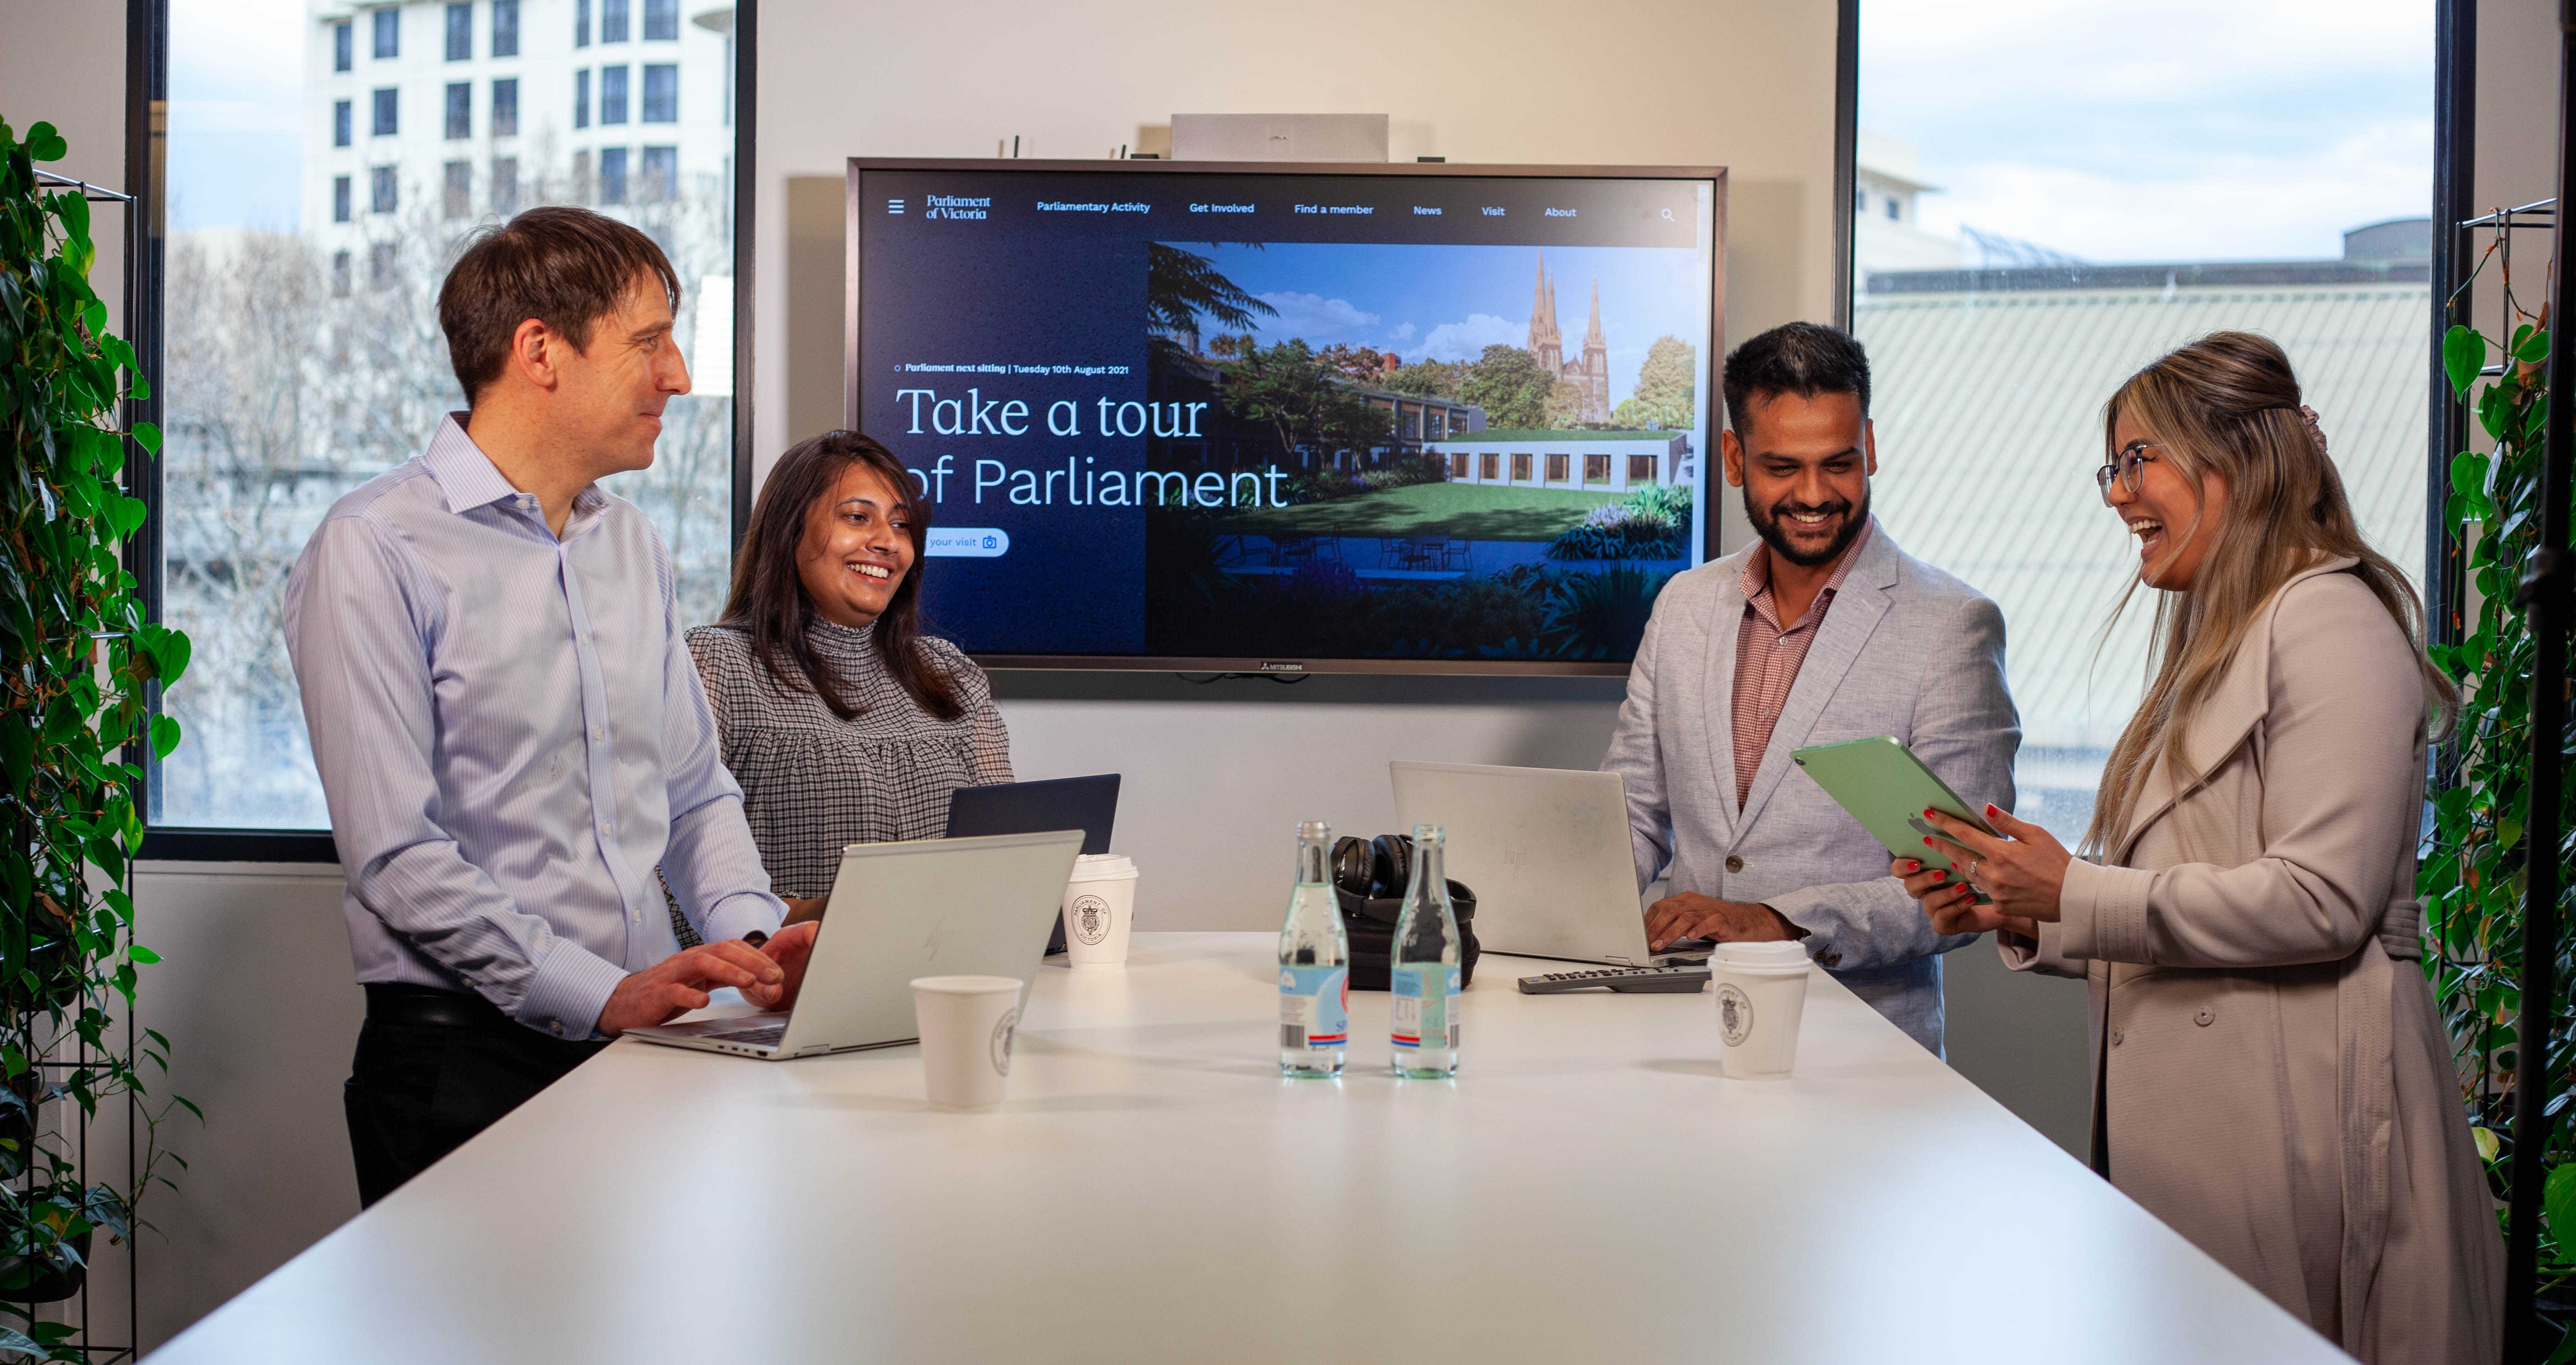 Four Parliament employees meet with a screen in the background with an image of Parliament 